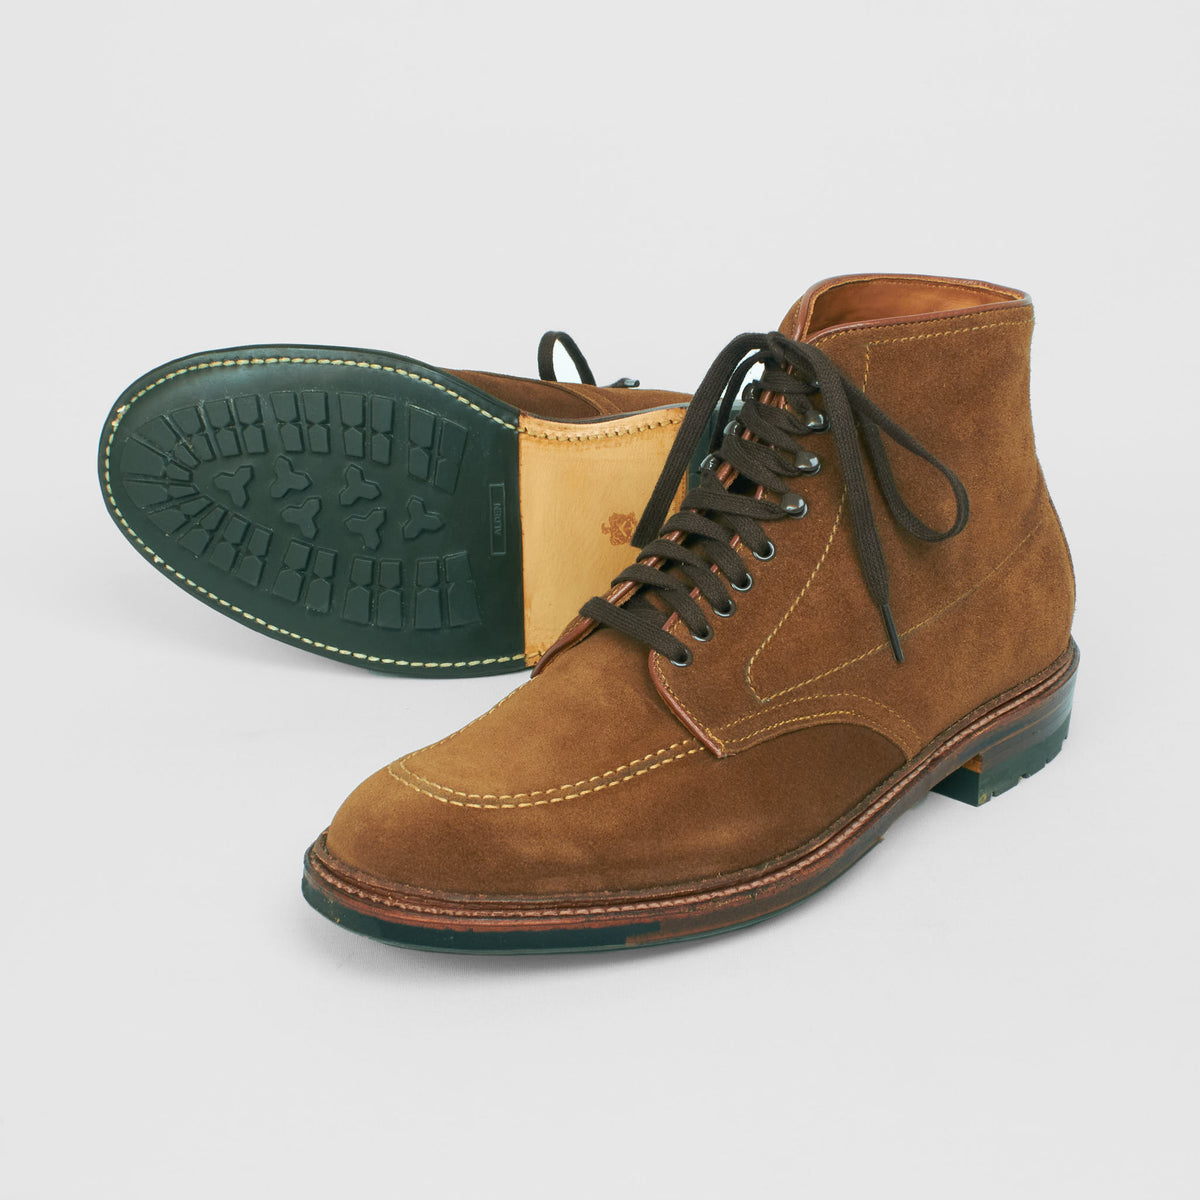 Alden Indy Boot Snuff Suede with Commando Sole 4011